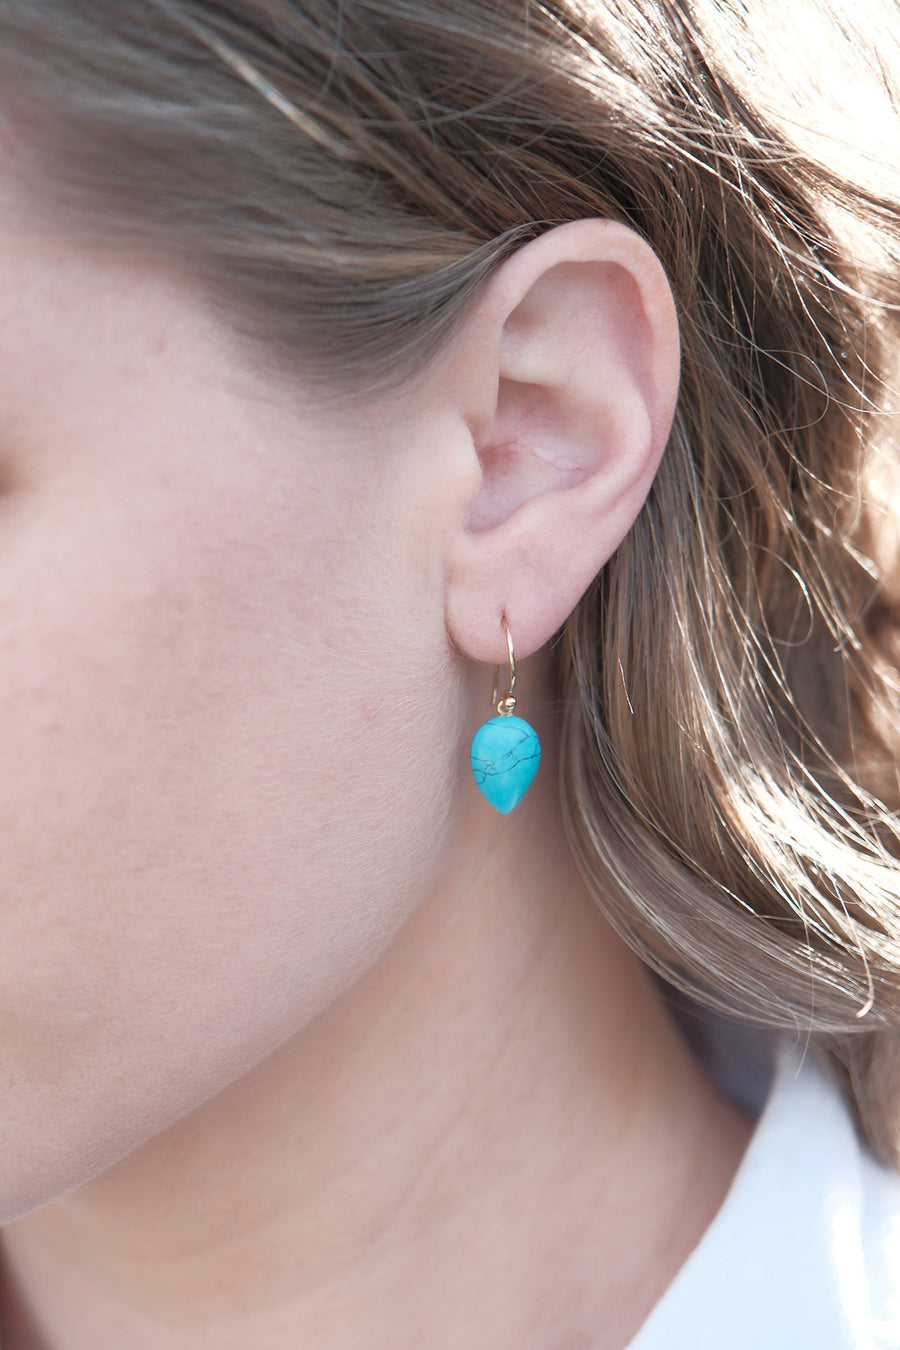 Mary-K - Gold Turquoise Cone Earrings